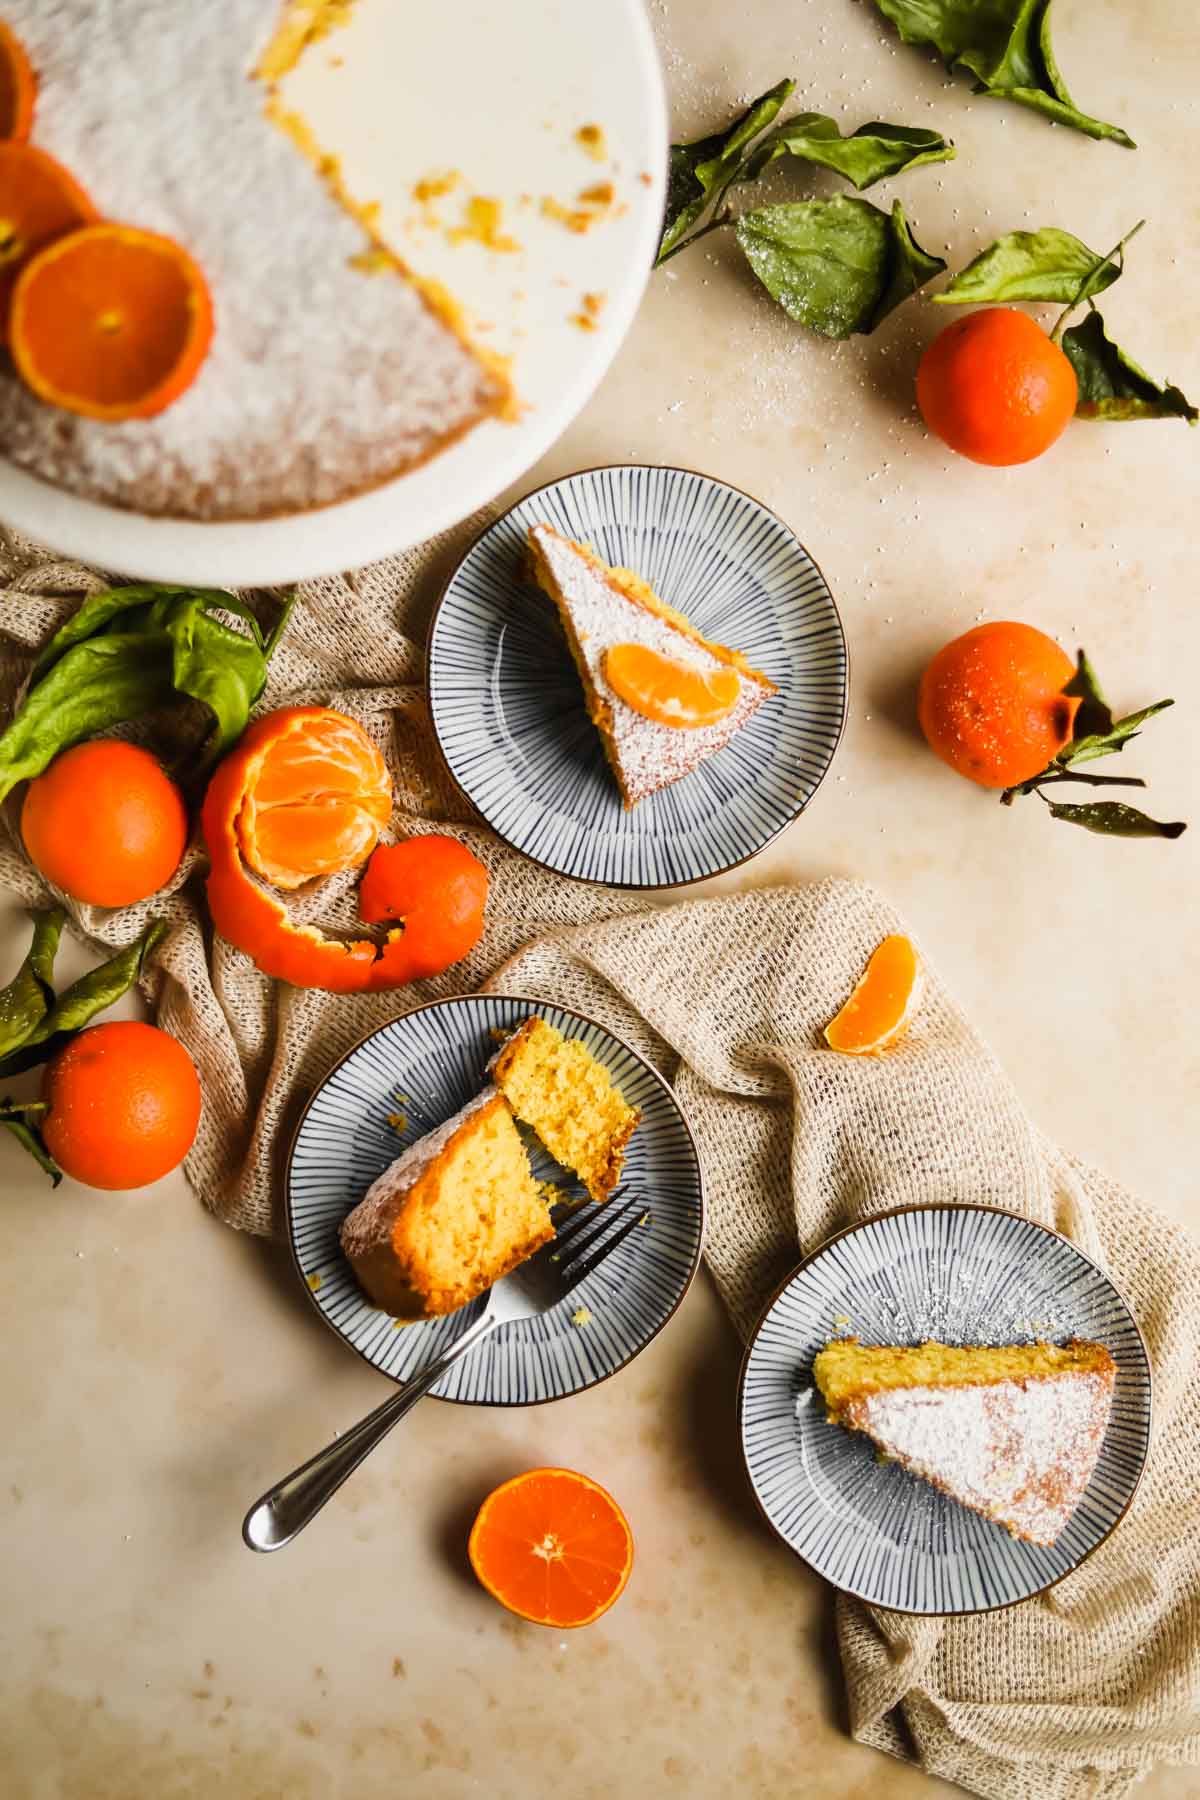 Clementine Olive Oil Cake slices on blue plates.